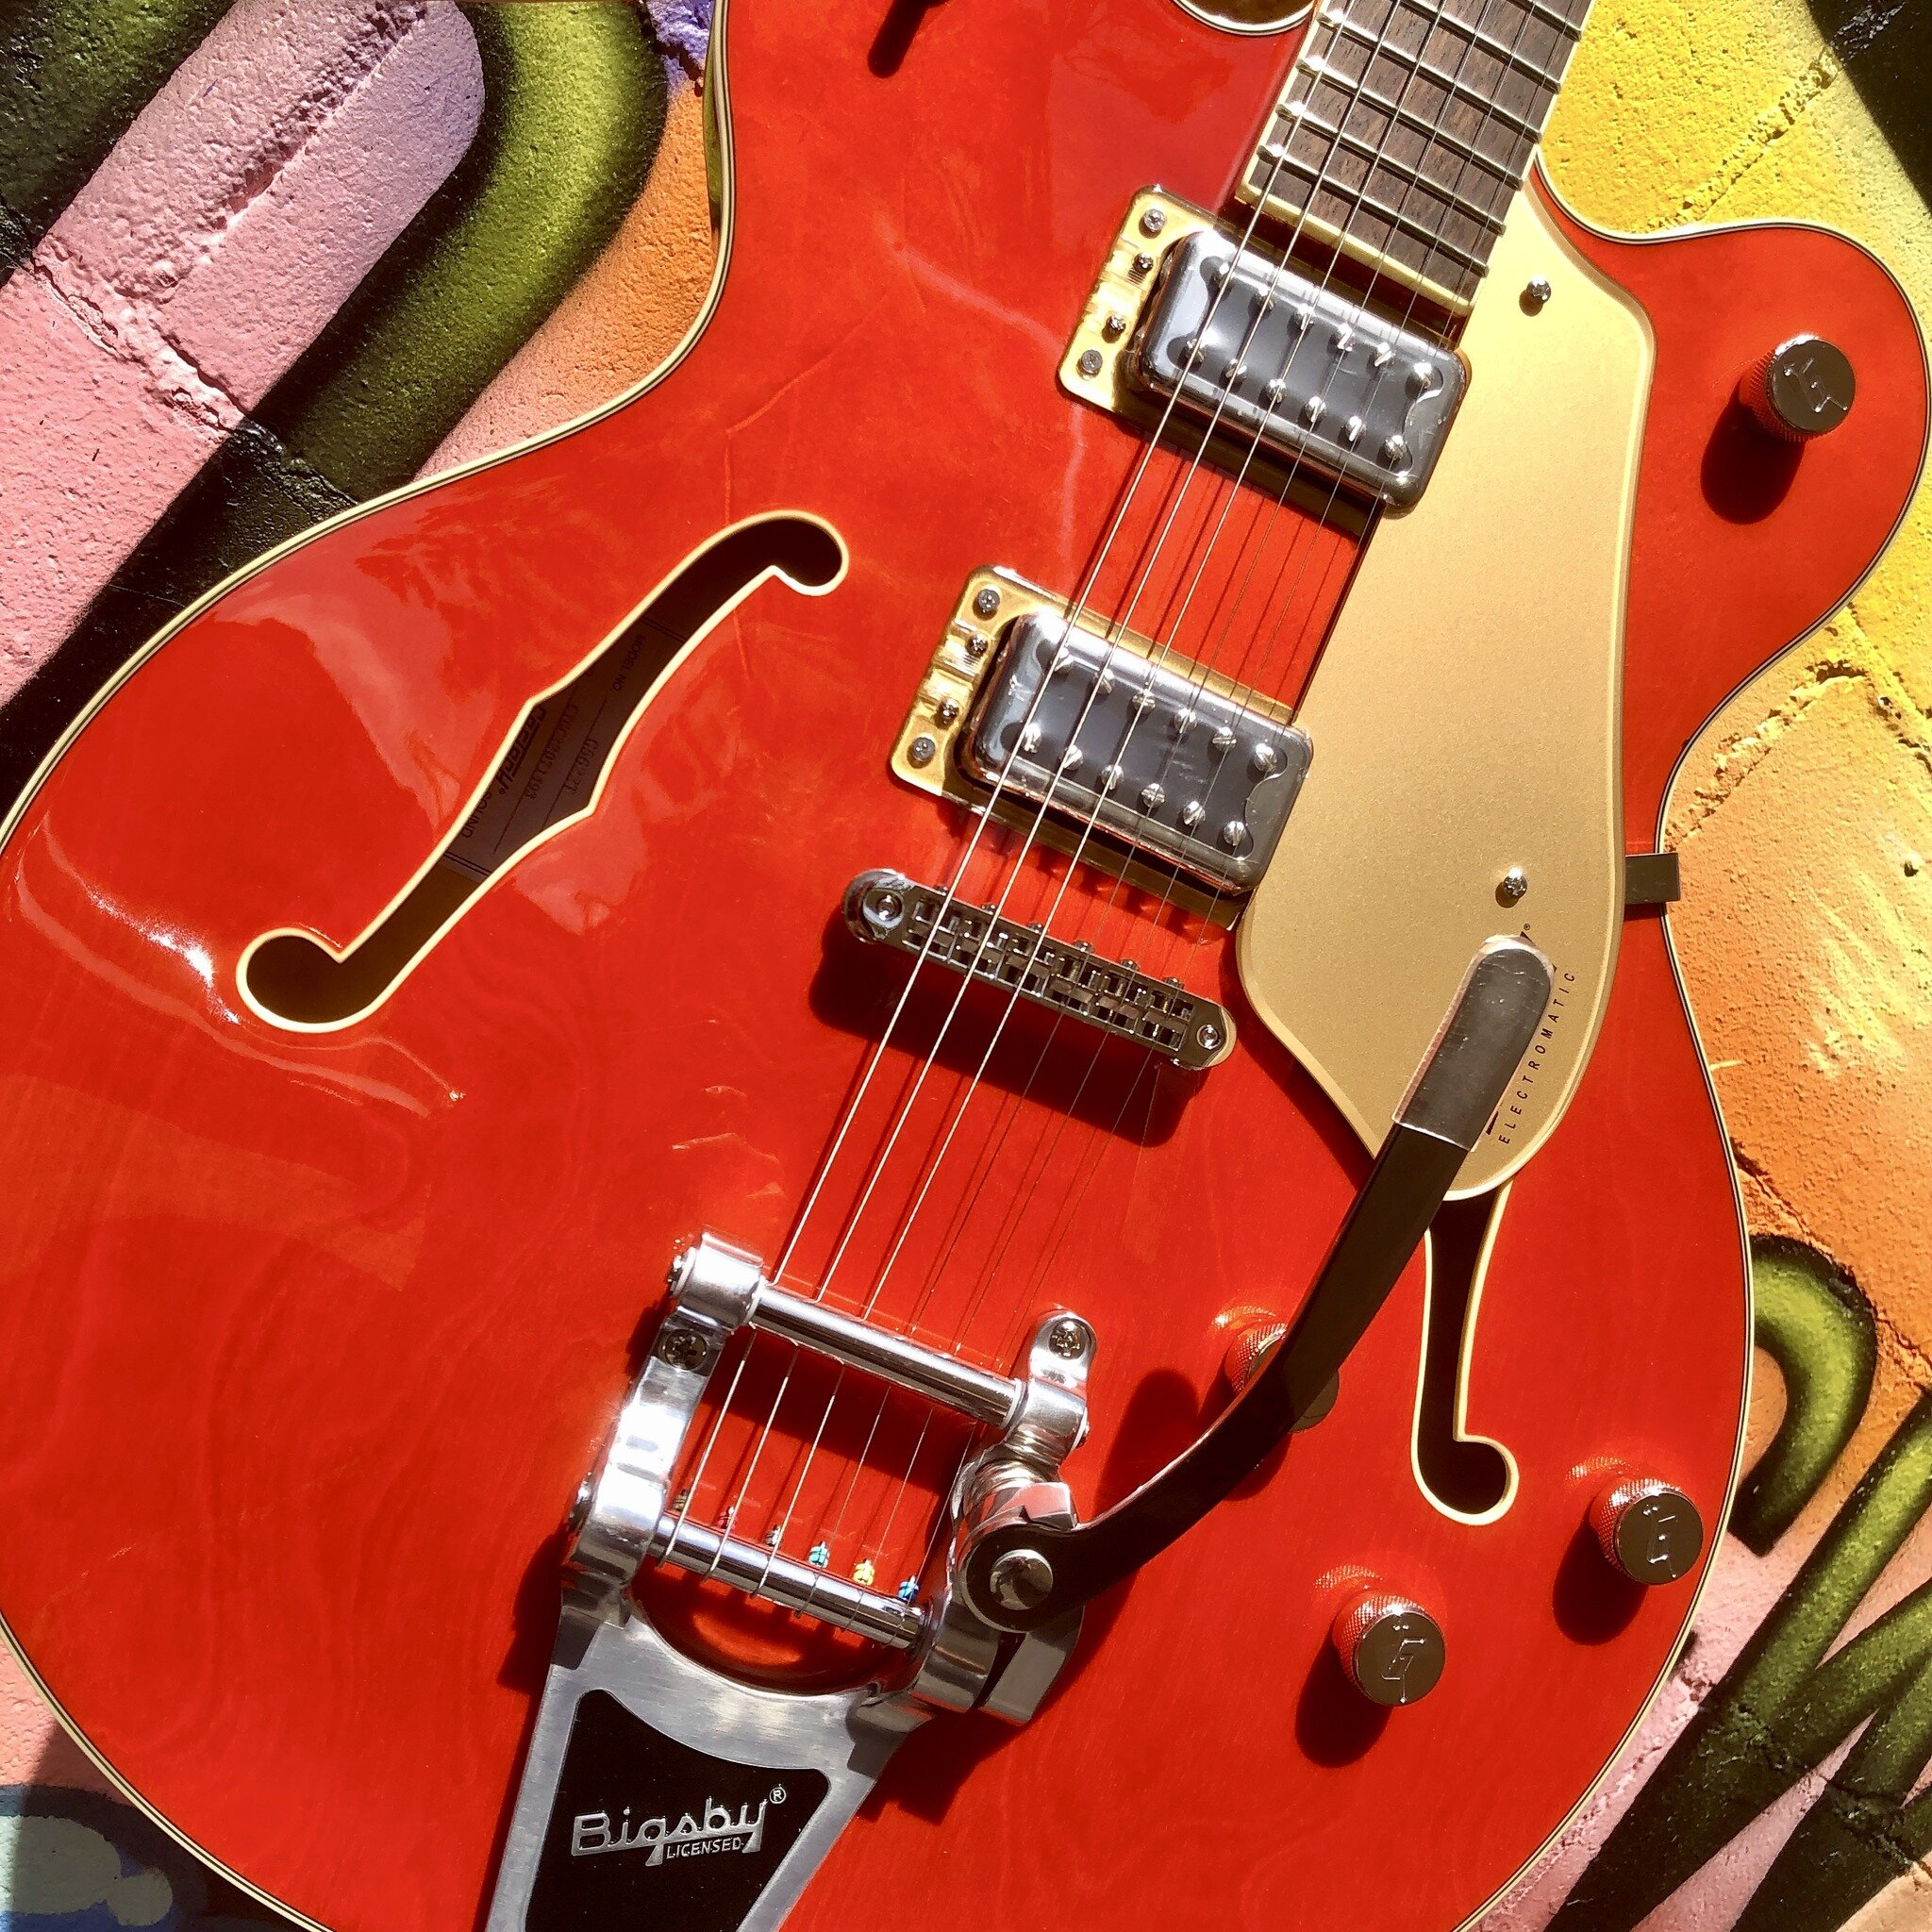 We are thrilled to announce that Blue Mountain Music is now a Gretsch dealer! Gretsch has summoned distinct vintage tone and dazzling style for over 140 years, and now they will grace the walls of our shop here in beautiful downtown Collingwood.

The